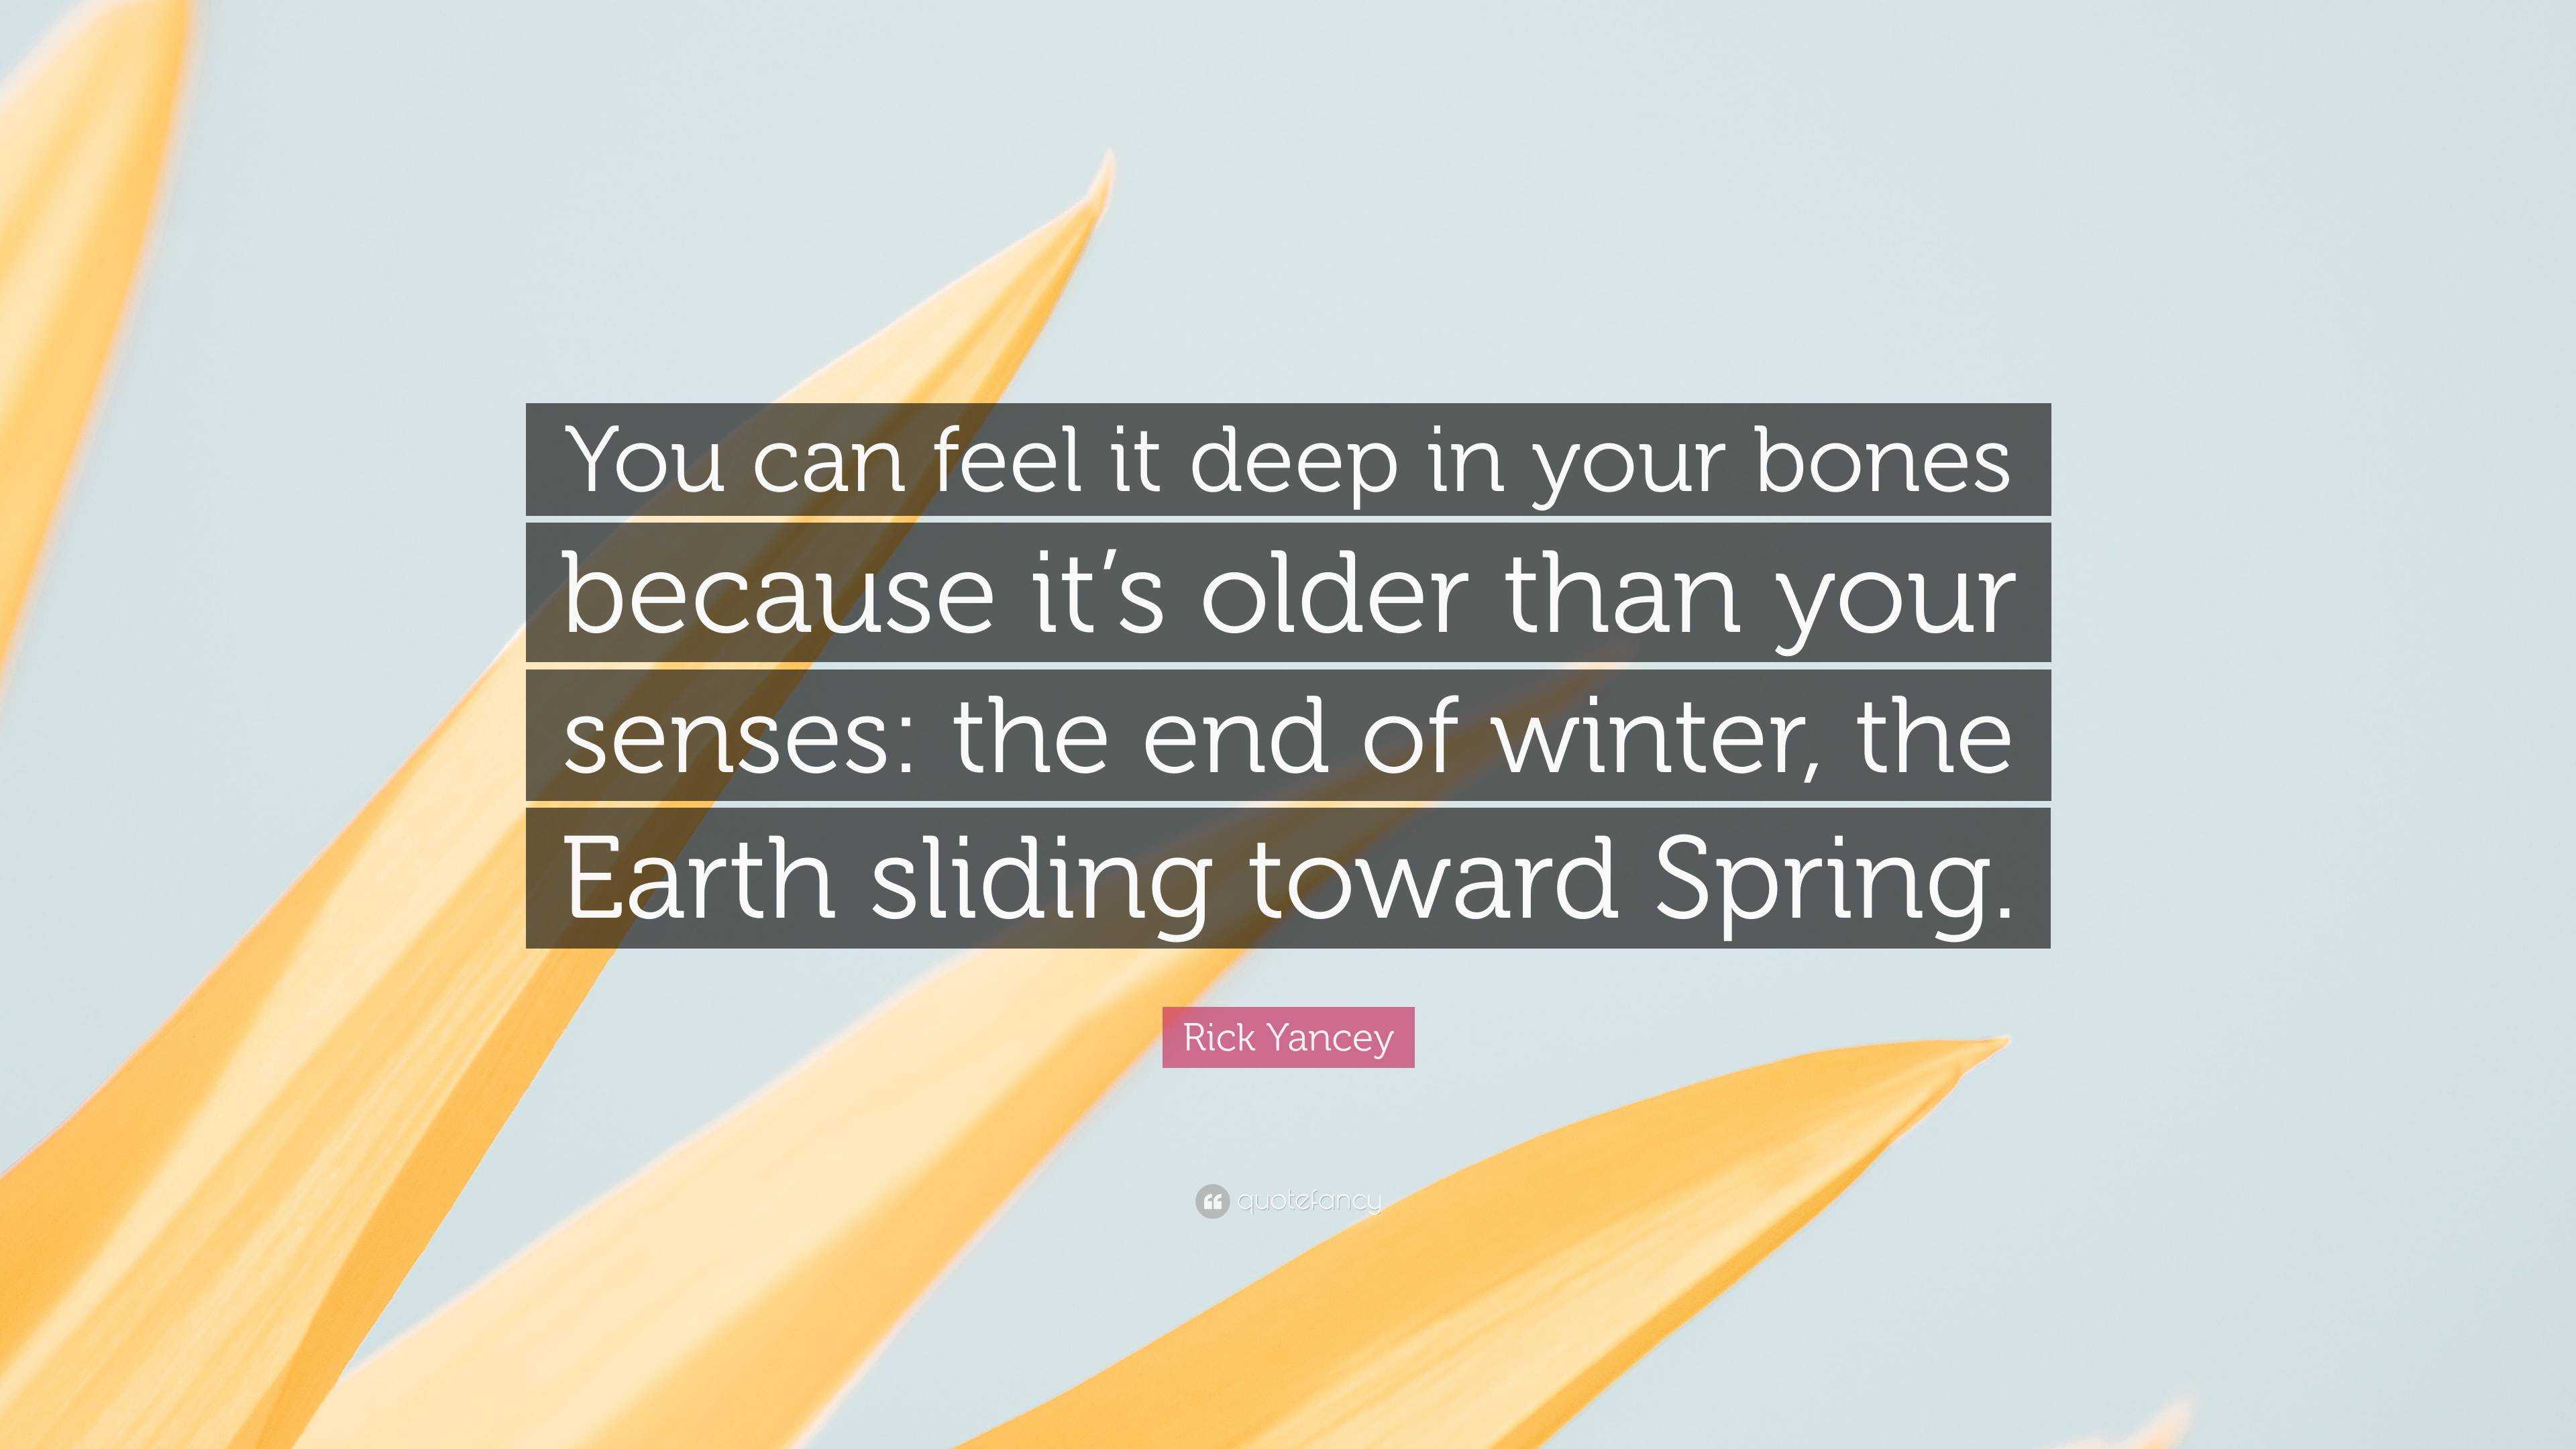 Rick Yancey Quote You Can Feel It Deep In Your Bones Because It S Older Than Your Senses The End Of Winter The Earth Sliding Toward Spri